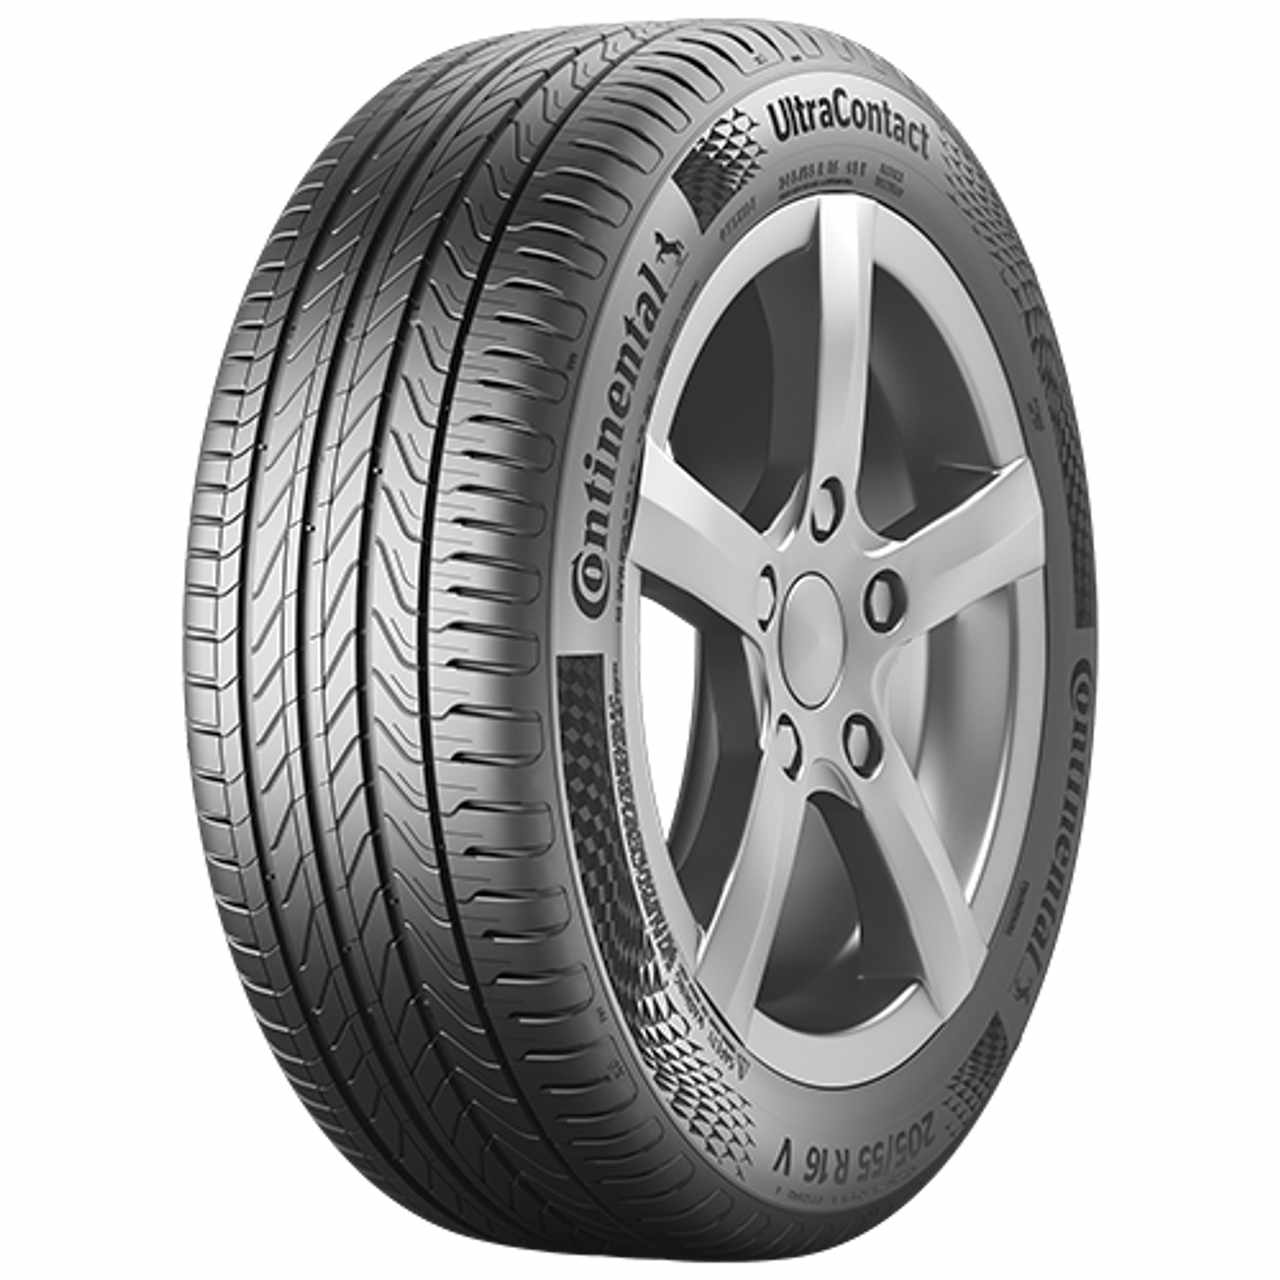 CONTINENTAL ULTRACONTACT (EVc) 185/60R15 88H BSW von Continental